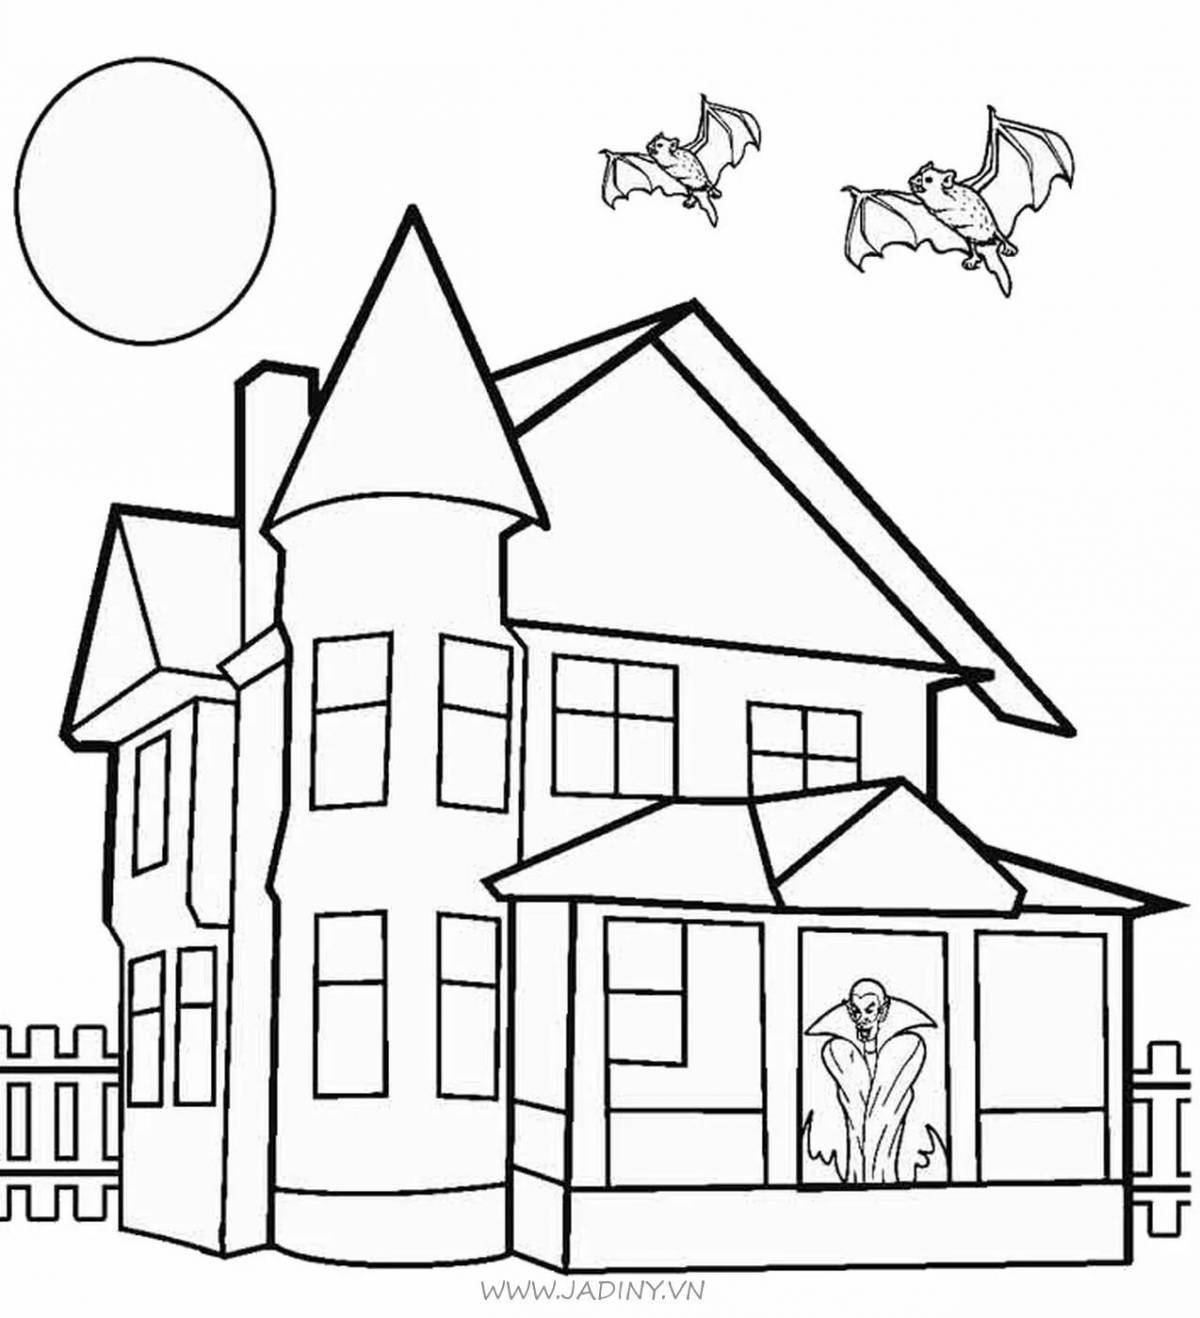 Coloring page impressive beautiful house